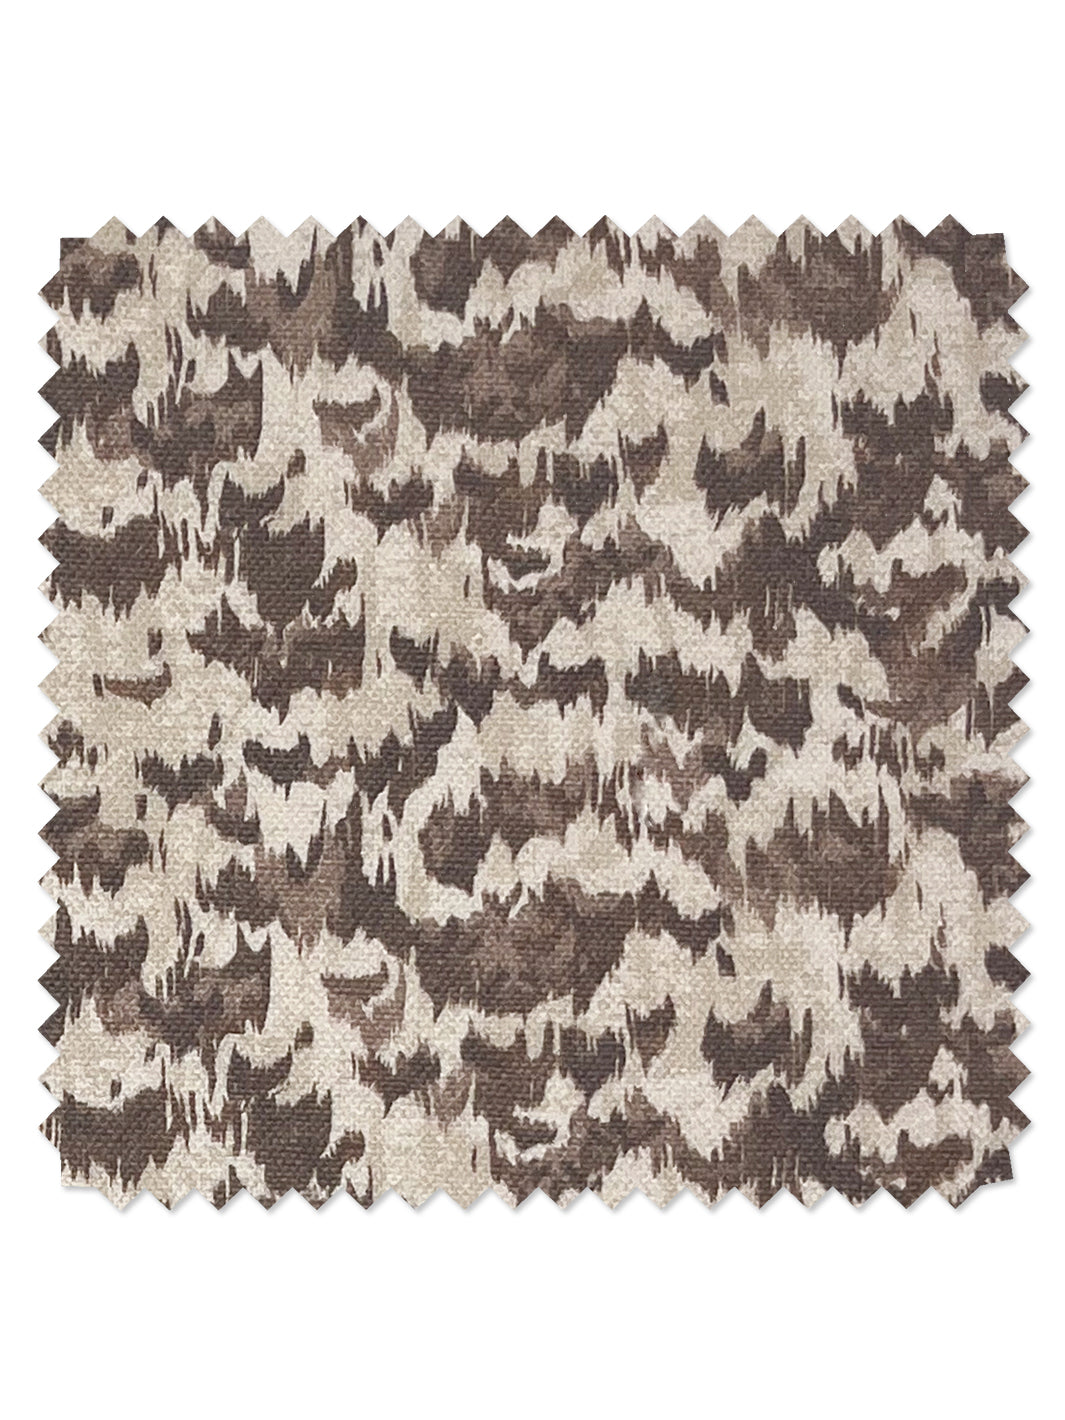 'Owl' Linen Fabric by Nathan Turner - Brown